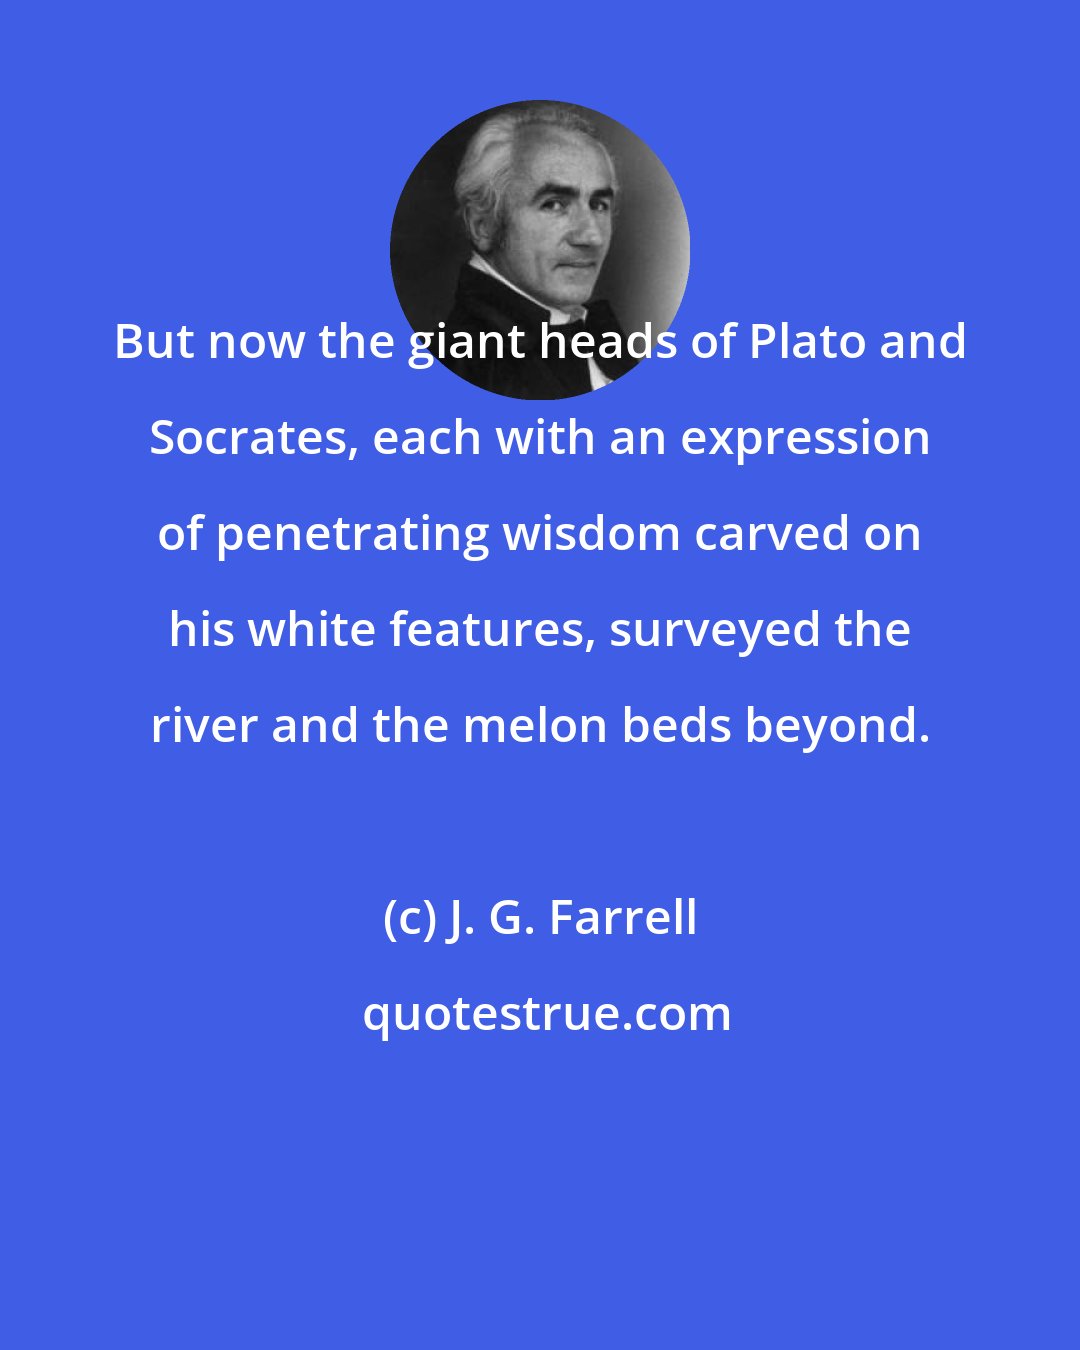 J. G. Farrell: But now the giant heads of Plato and Socrates, each with an expression of penetrating wisdom carved on his white features, surveyed the river and the melon beds beyond.